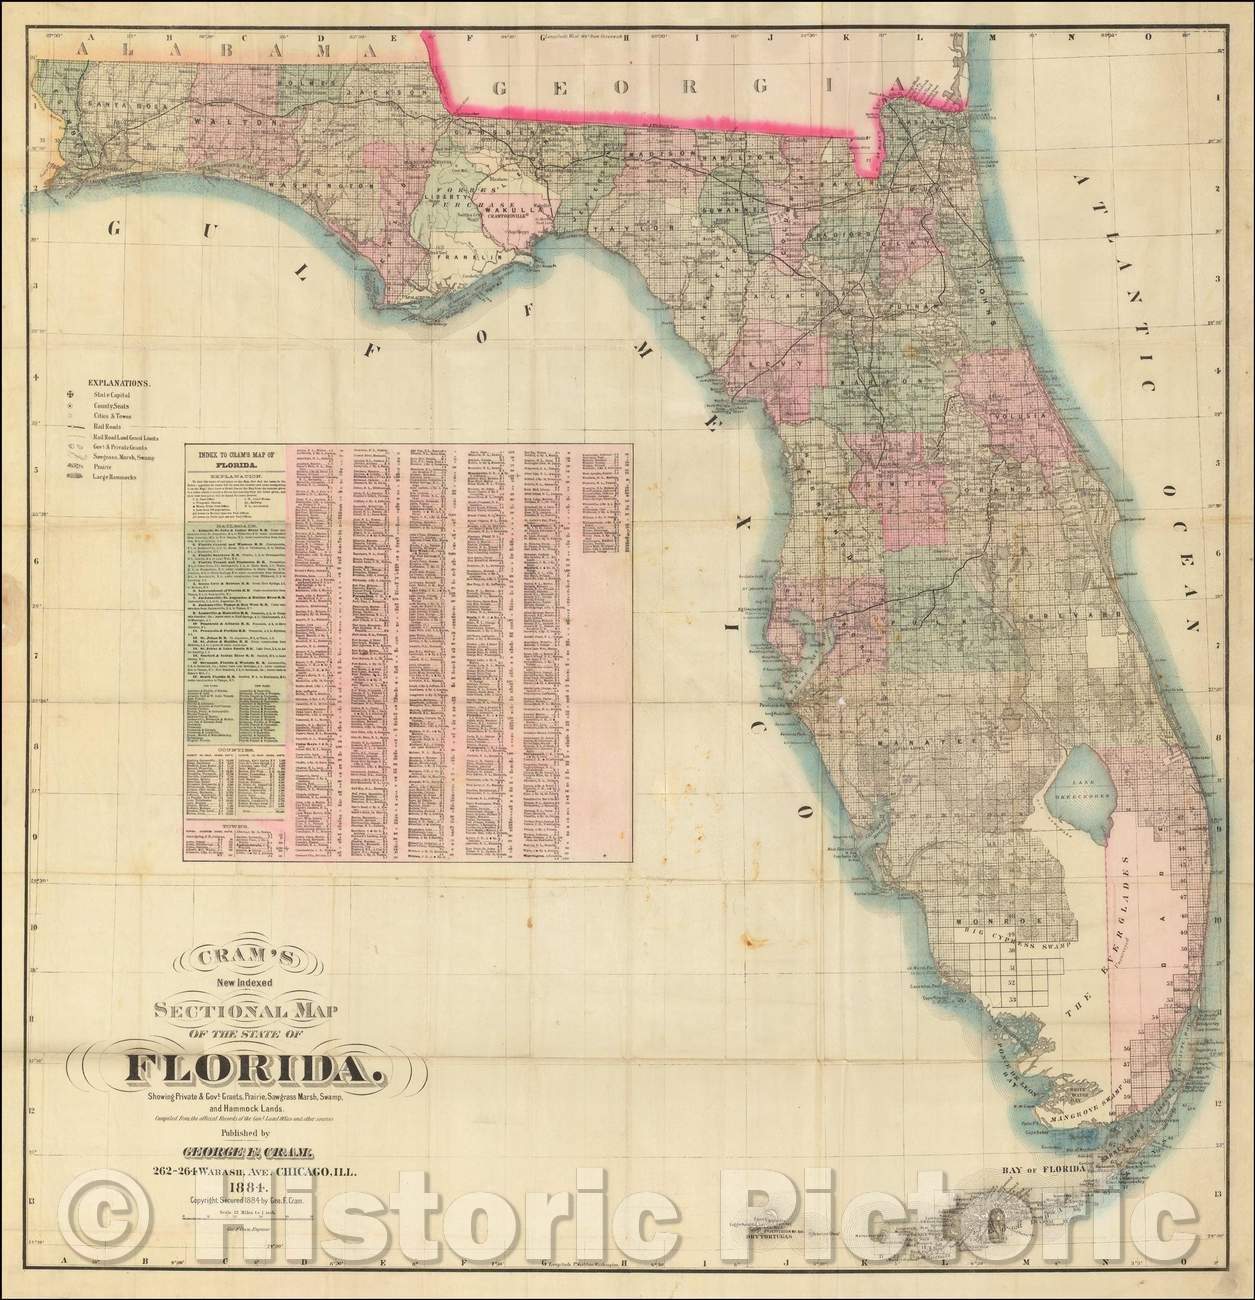 Historic Map - Cram's New Indexed Sectional of the State of Florida. Showing Private & Gov't Grants, Prairie, Sawgrass, Marsh, Swamp, and Hammock Lands, 1884 - Vintage Wall Art